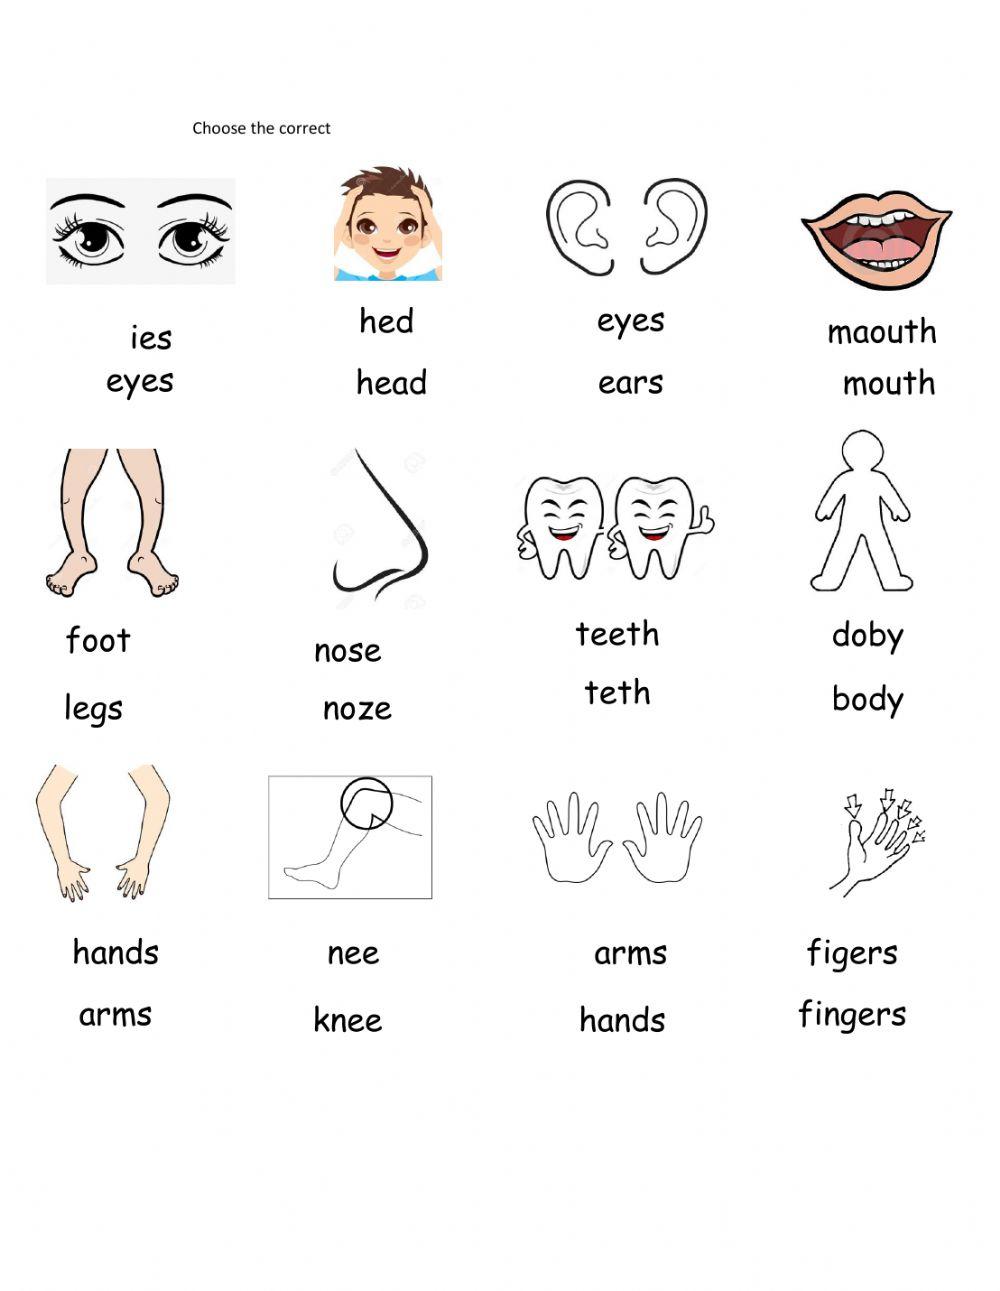 Body parts dictation